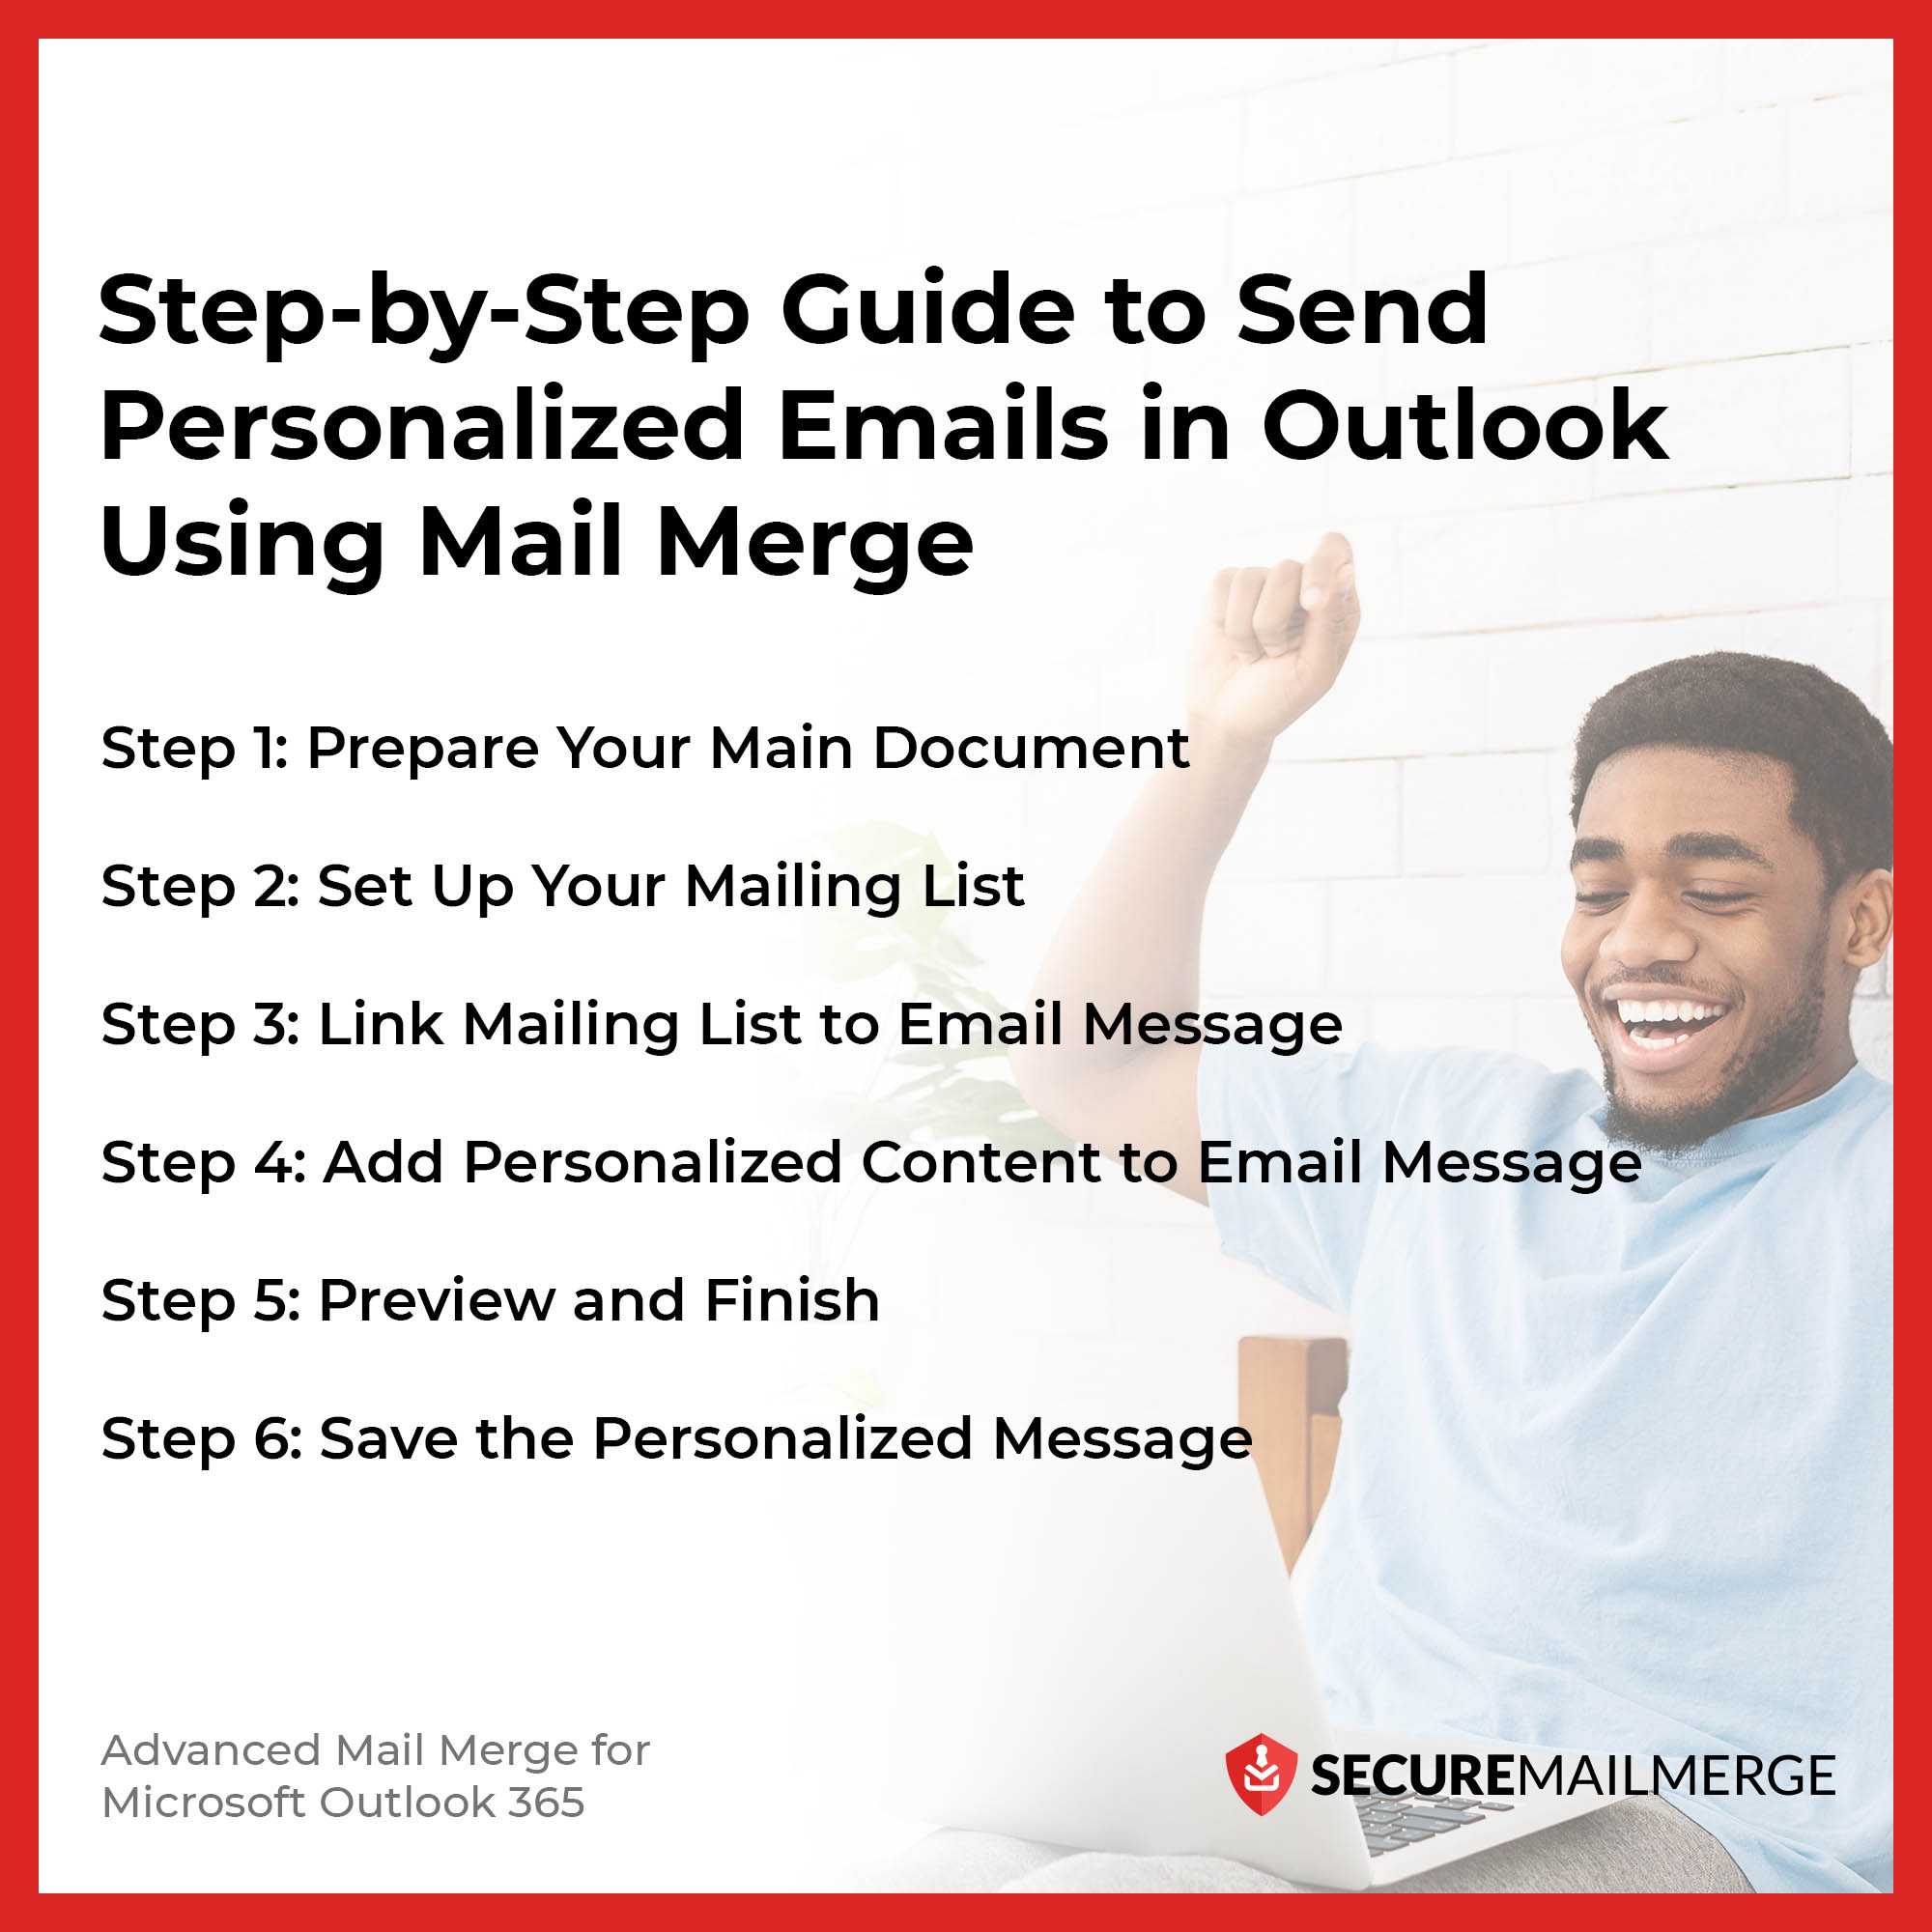 Step-by-Step Guide to Send Personalized Emails in Outlook Using Mail Merge